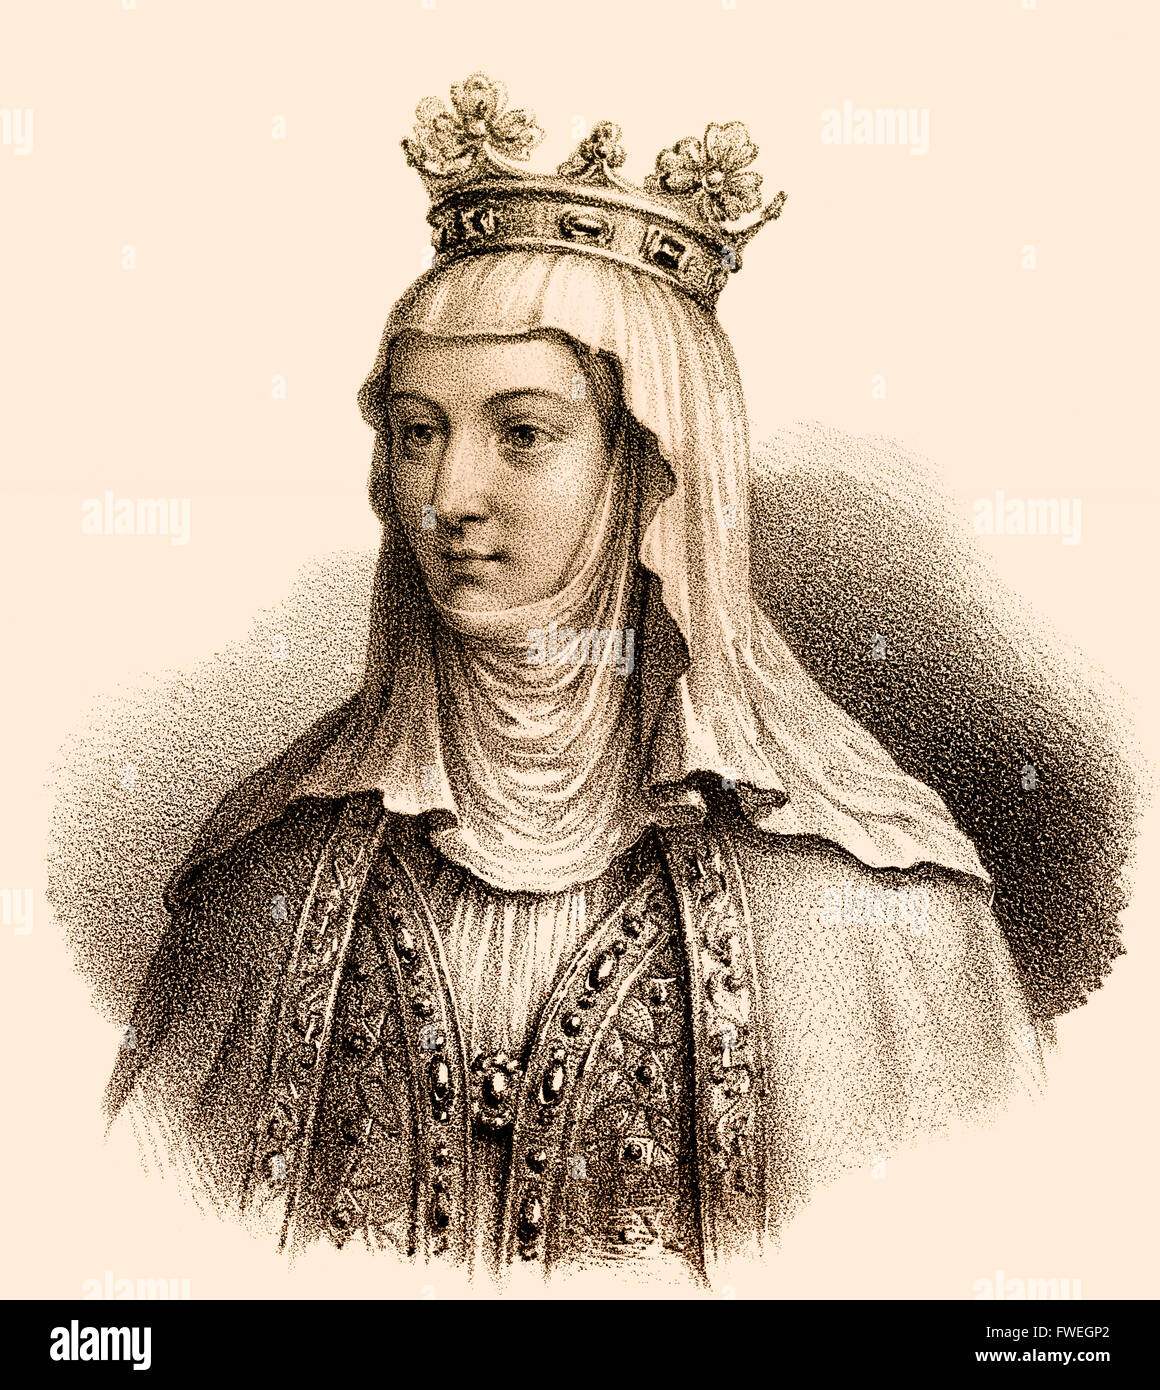 Clementia of Hungary, Clémence de Hongrie, Klementine von Ungarn, 1293-1328, queen of France and Navarre as the second wife of K Stock Photo